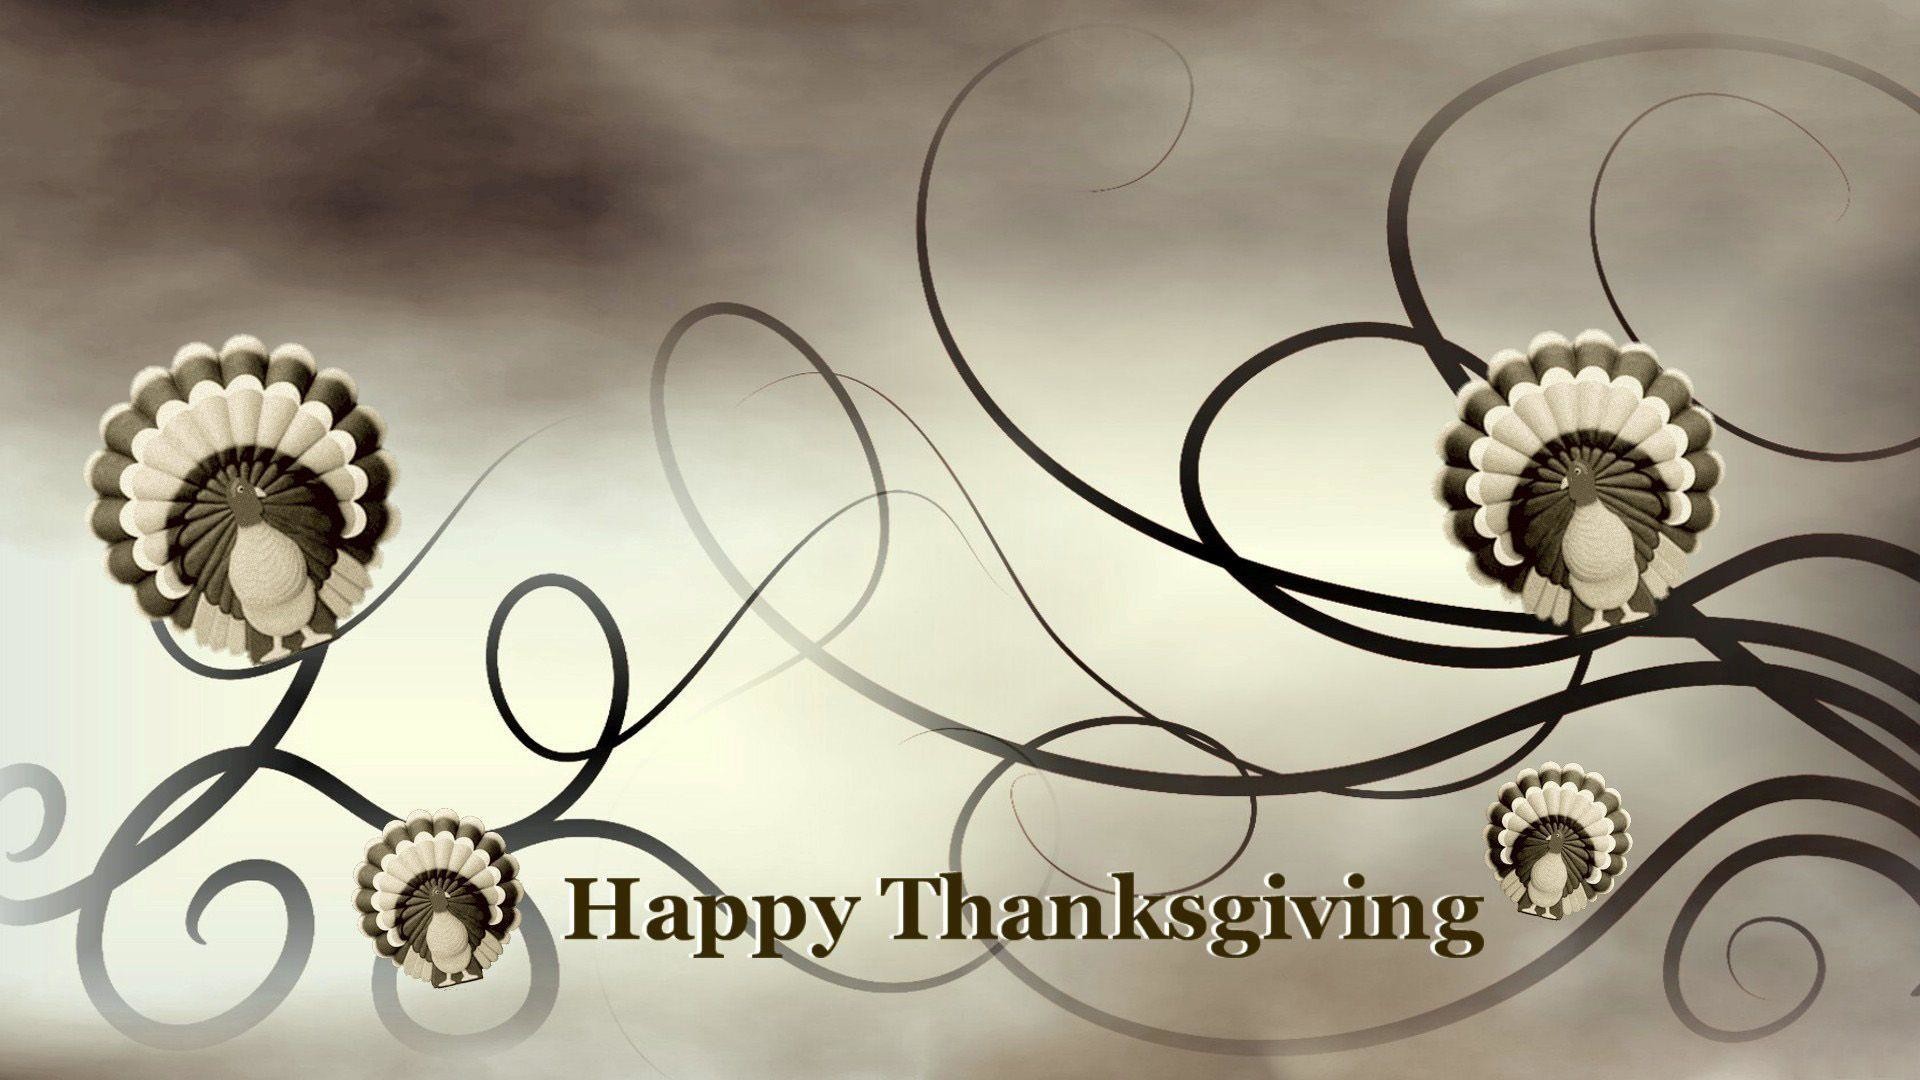 1920x1080 Cute Thanksgiving Desktop Wallpaper Images & Pictures - Becuo